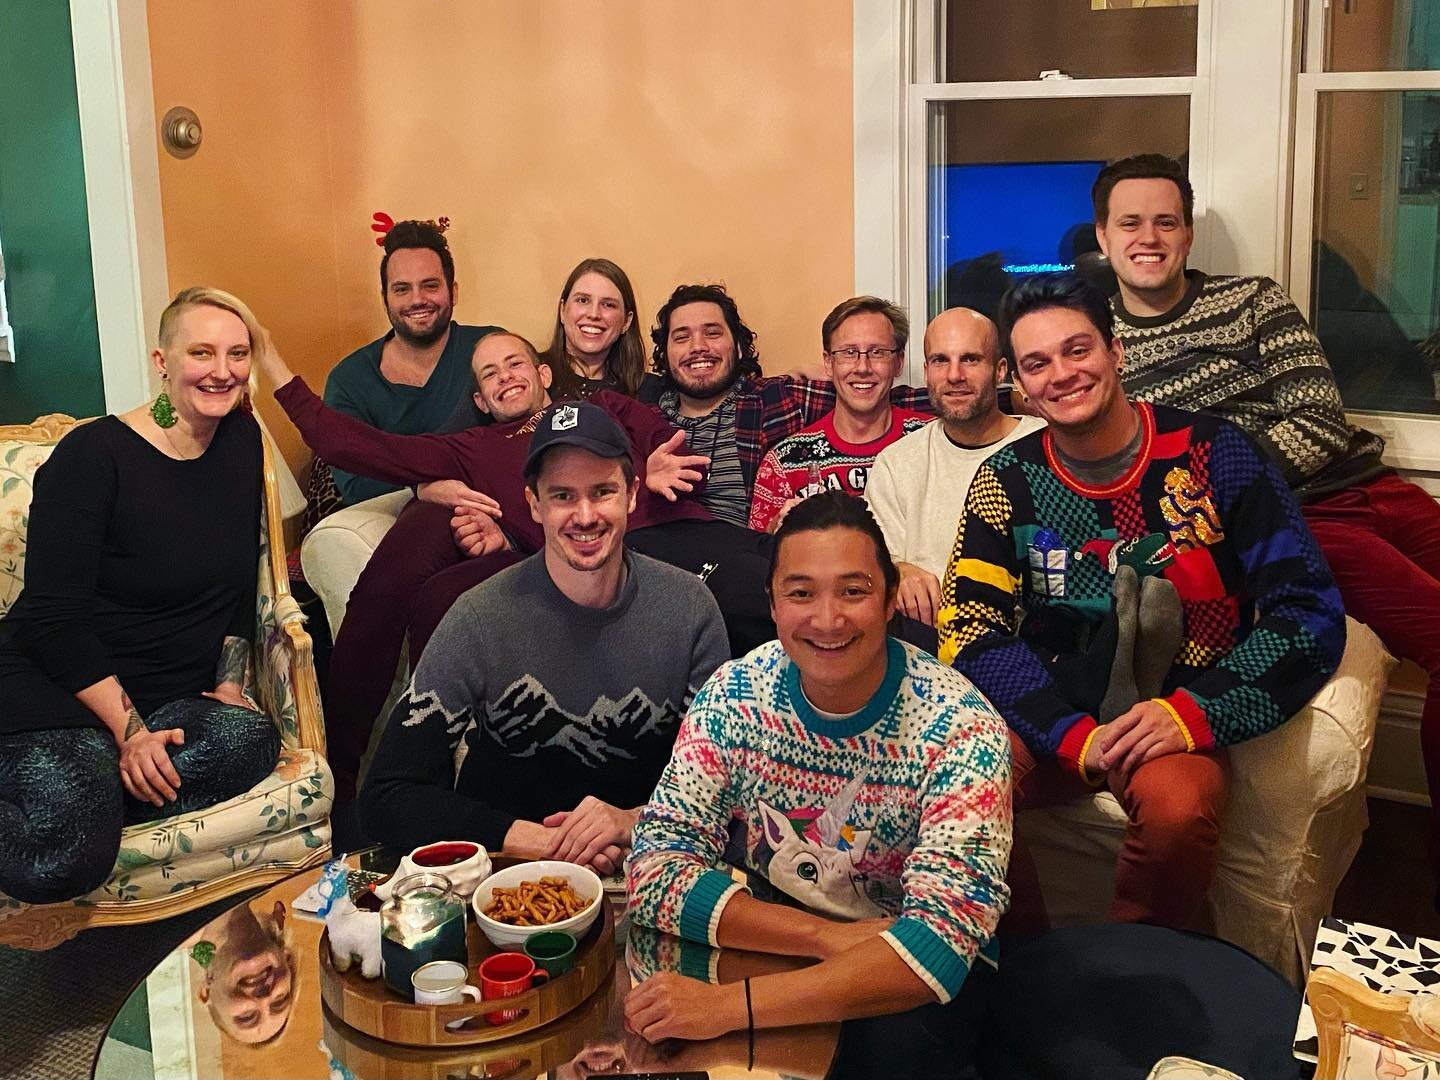 Happy Holigays from MN Ice! Thank you to @nhurth21 for hosting the team for our first holiday party ever! 🎄🎁☃️🎅 What a fun night! Let&rsquo;s do it again sometime 😊
.
.
.
.
#happyholidays #merrychristmas #gayswimteam #queerswimming #igla #mnicesw